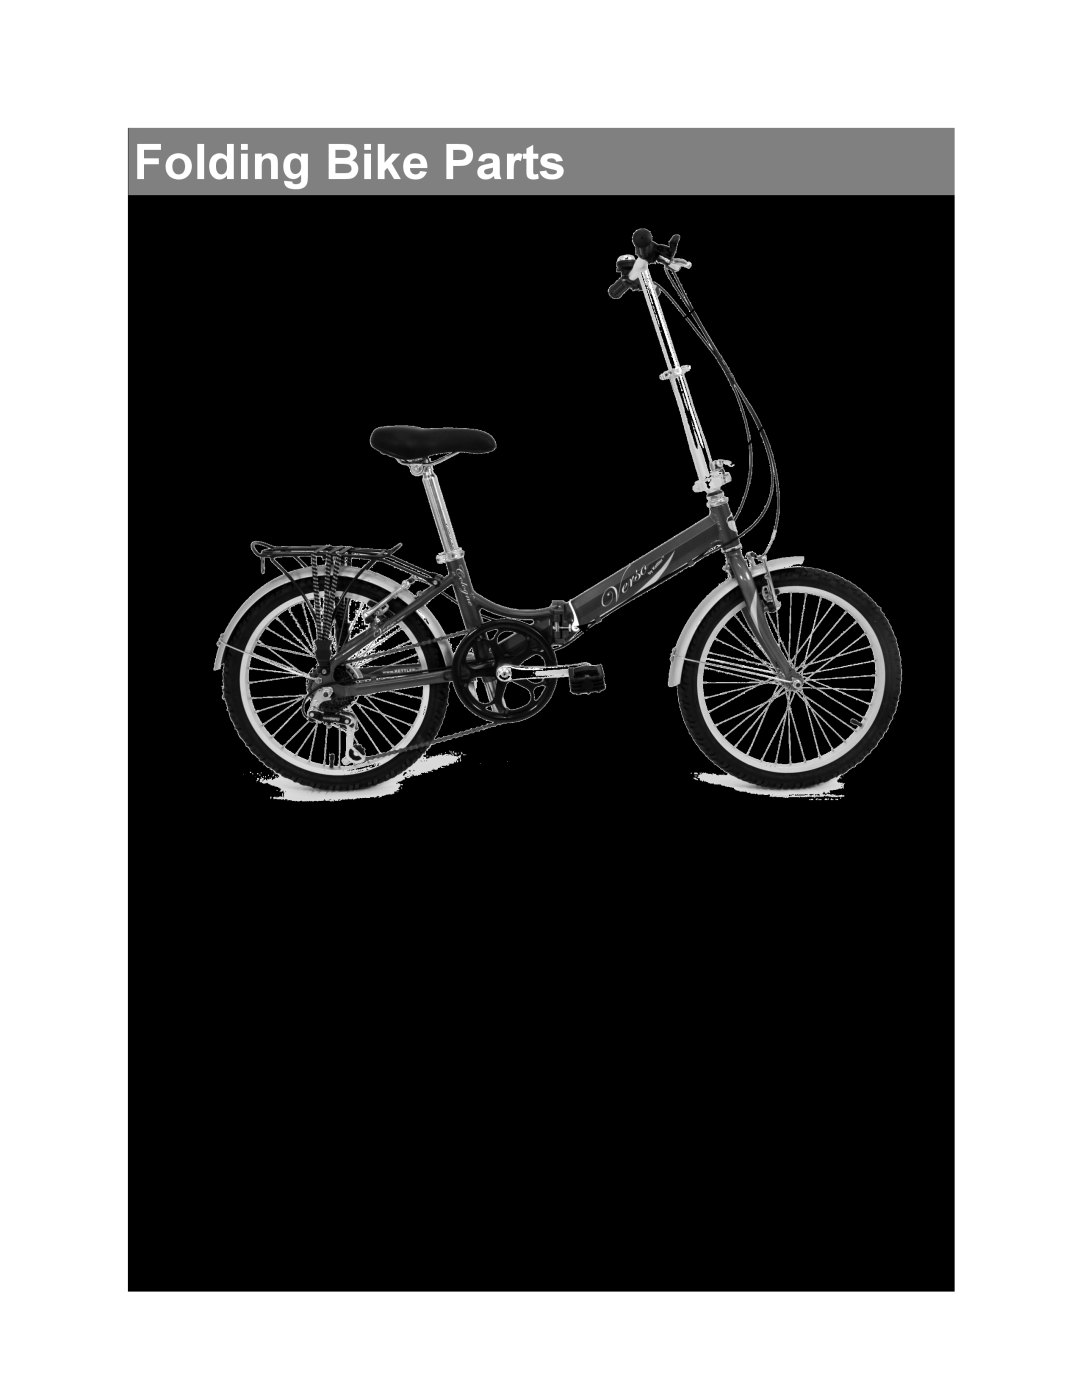 Kettler KT499-200 manual Folding Bike Parts, B. Quick Release Lever C. Double-Lock Quick release Frame Lock, D A E G B C F 